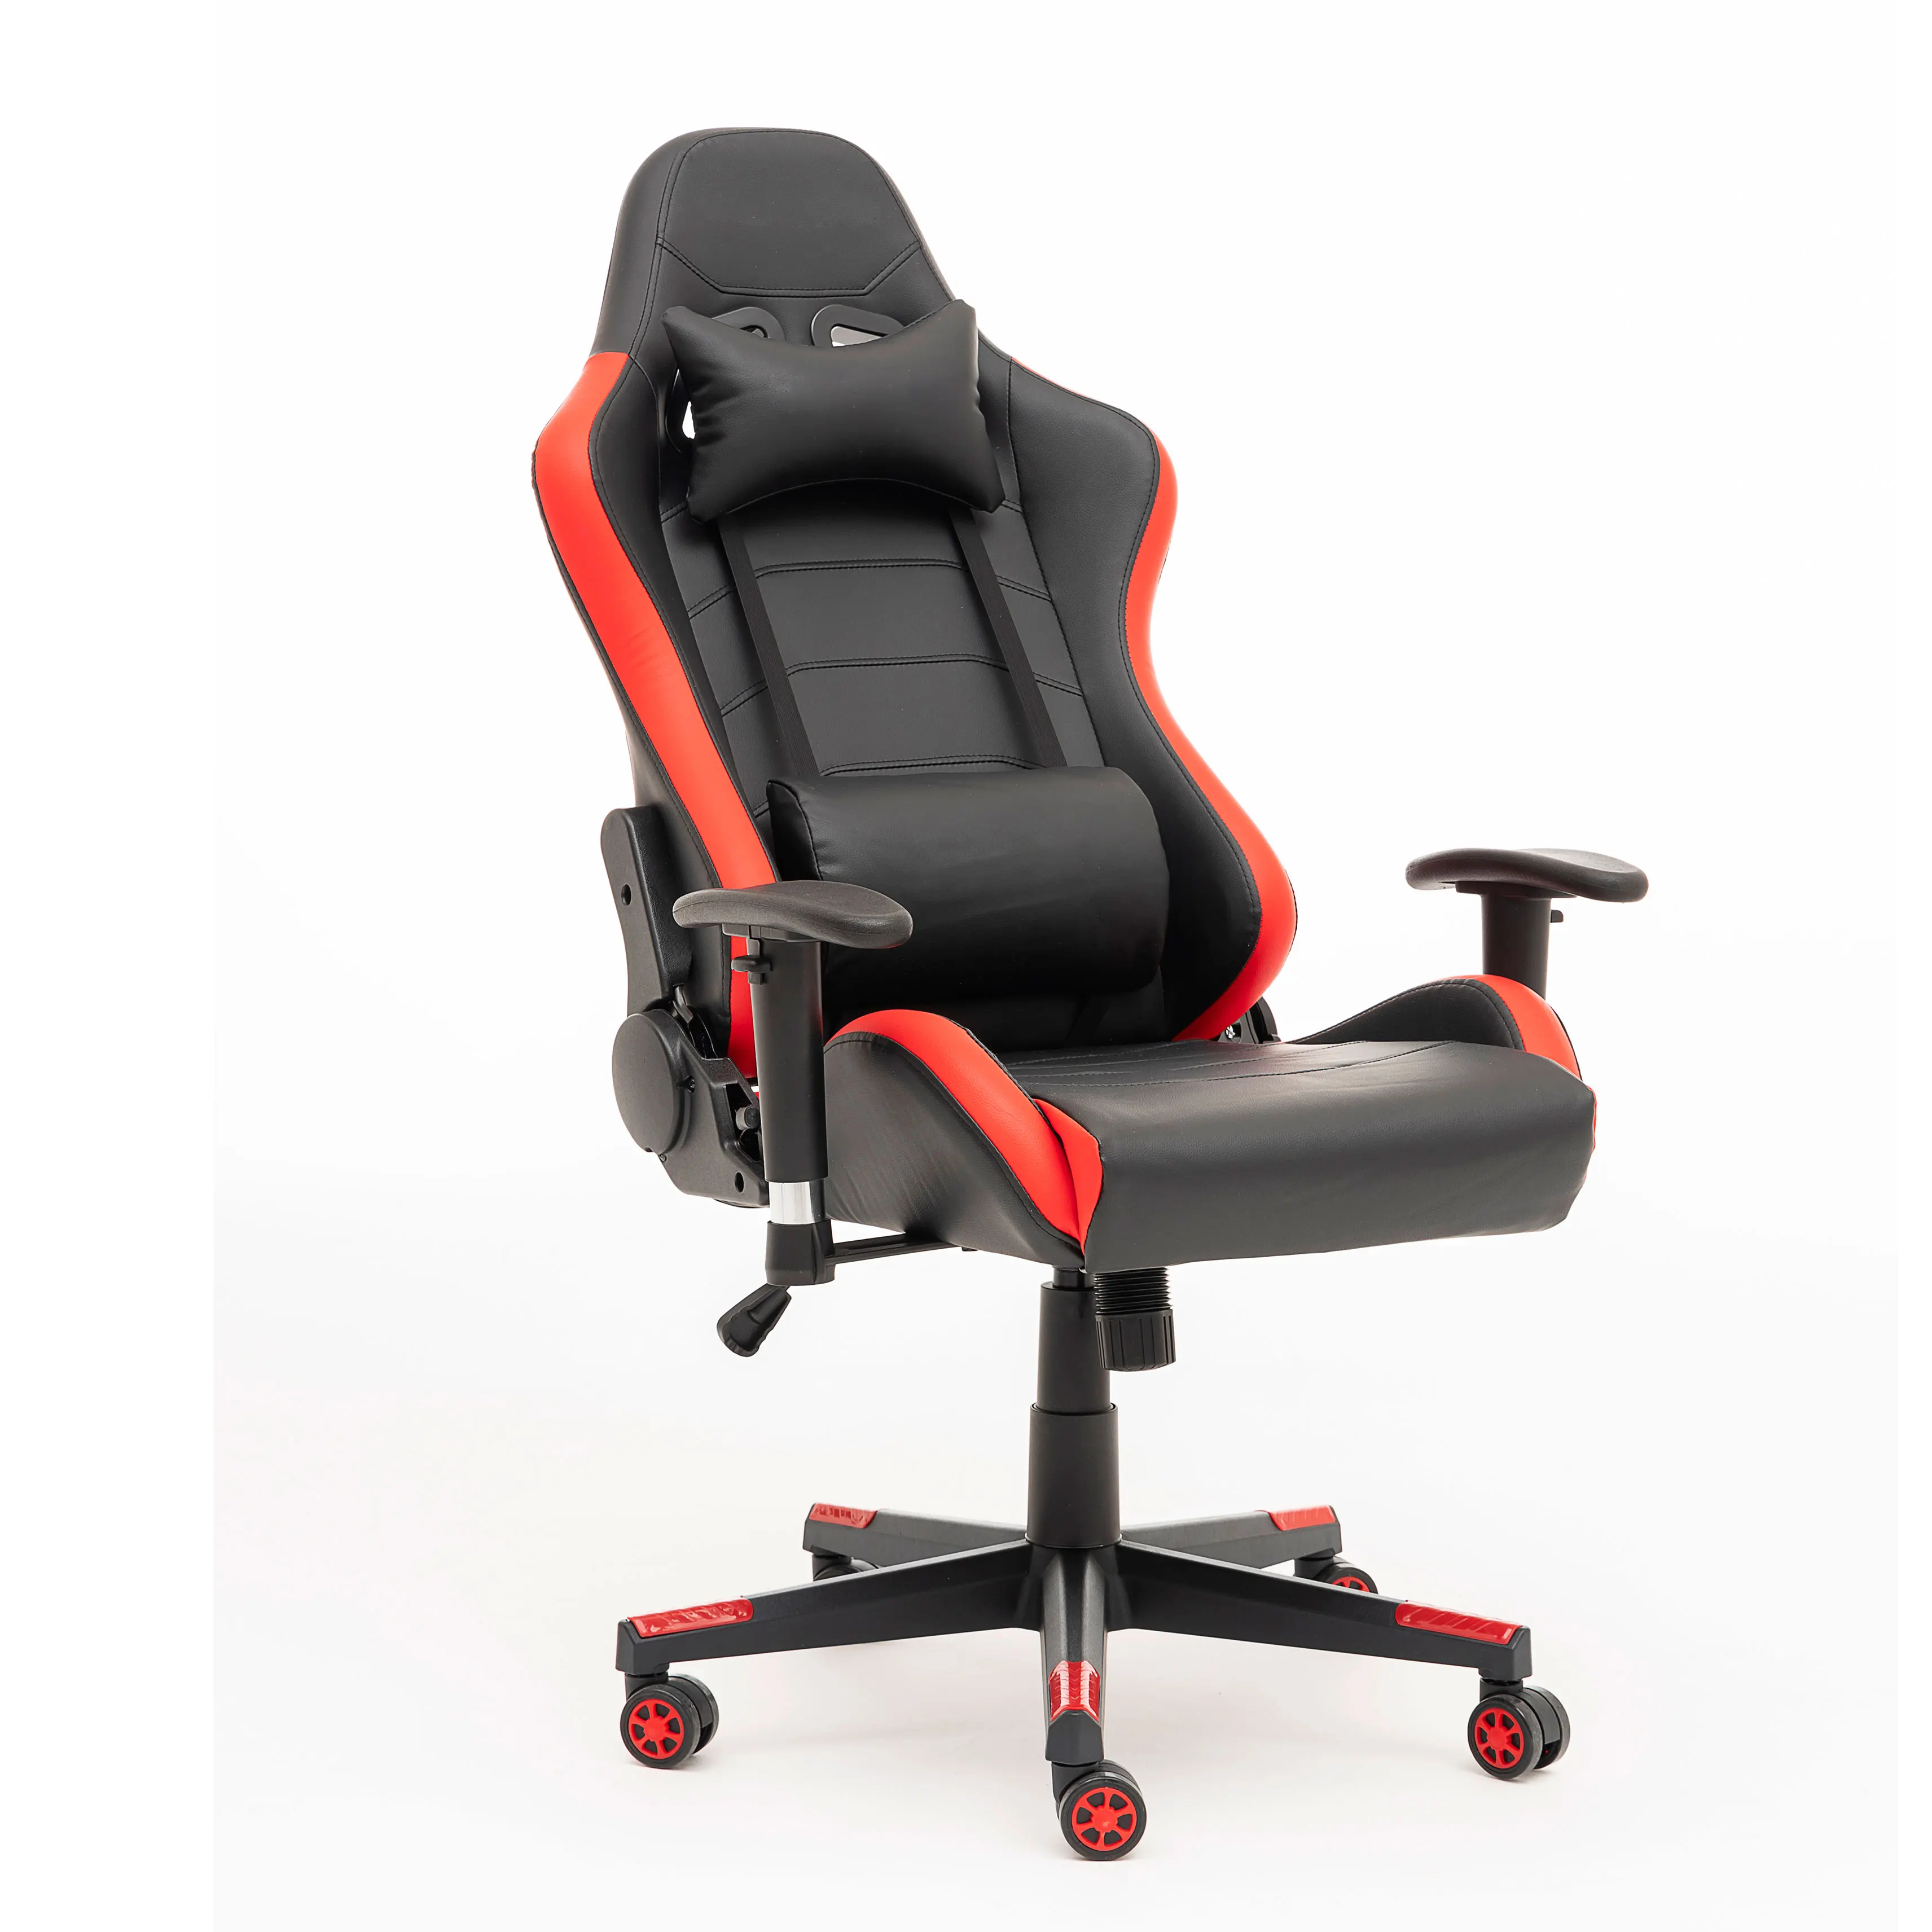 Wholesale Office LED RGB Comfortable Game Chair Swiveling Gamer chair Conference Chair